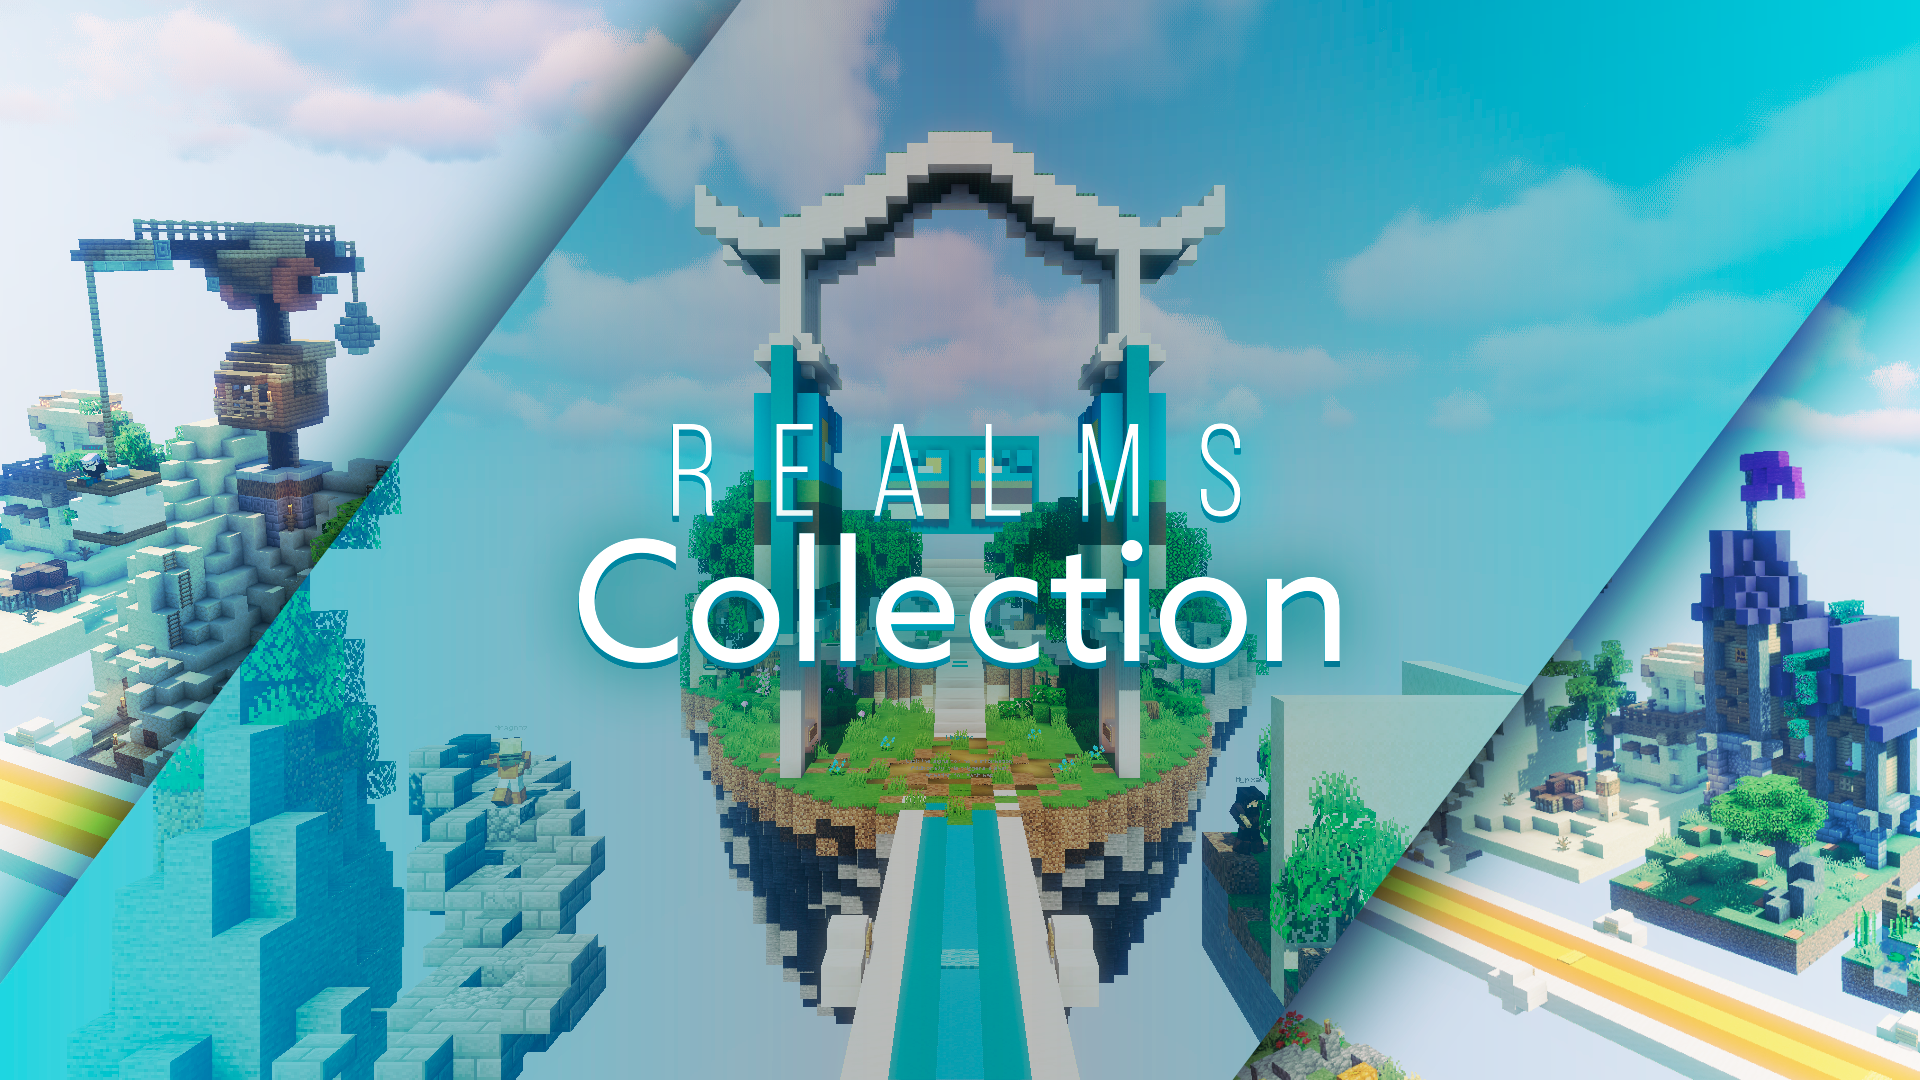 Realms Collection